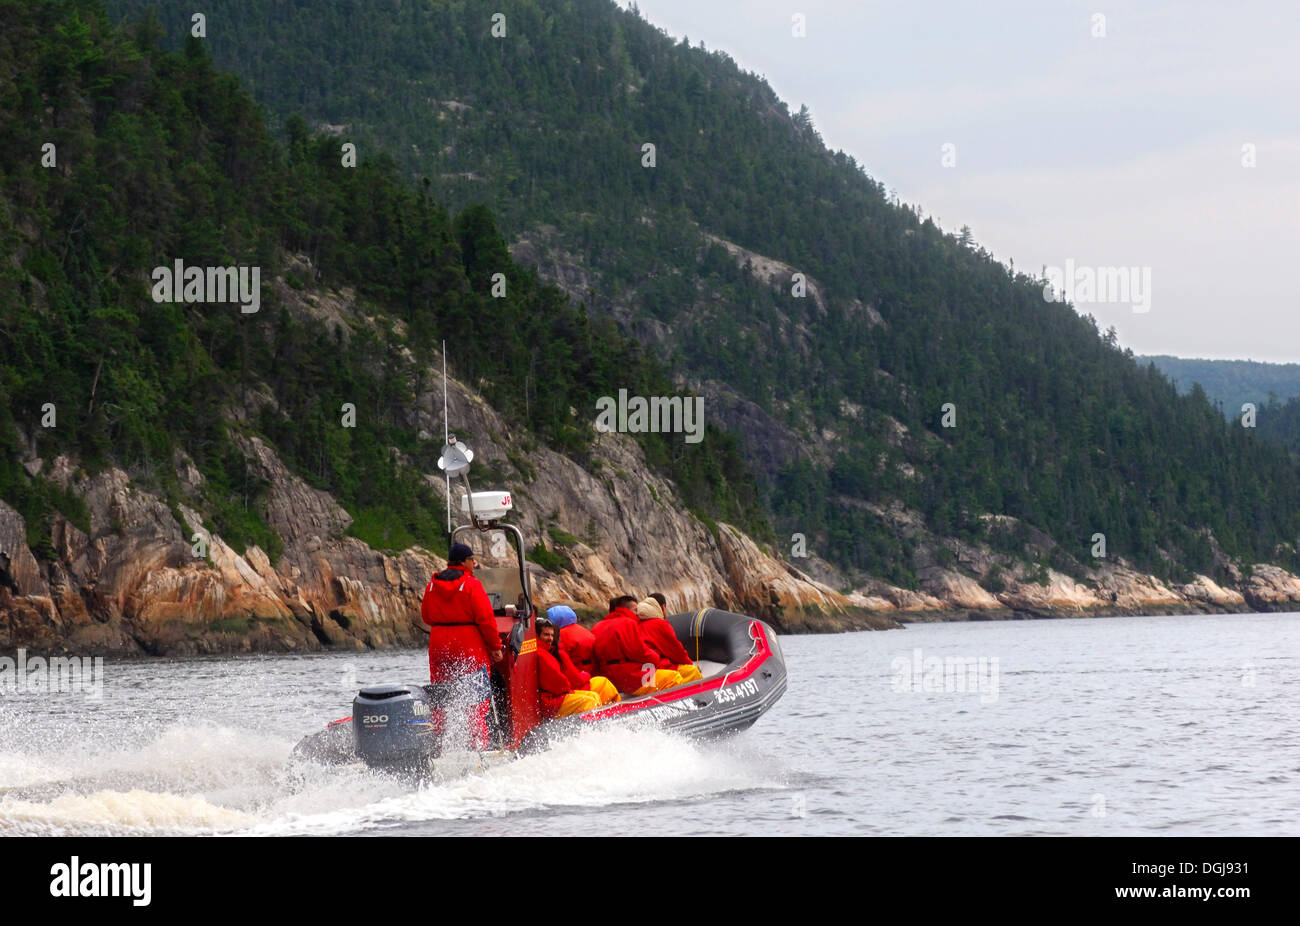 Tourists in a Zodiac inflatable boat from the Otis Excursions Inc. company on the Saguenay Fjord, Tadoussac, Canada Stock Photo